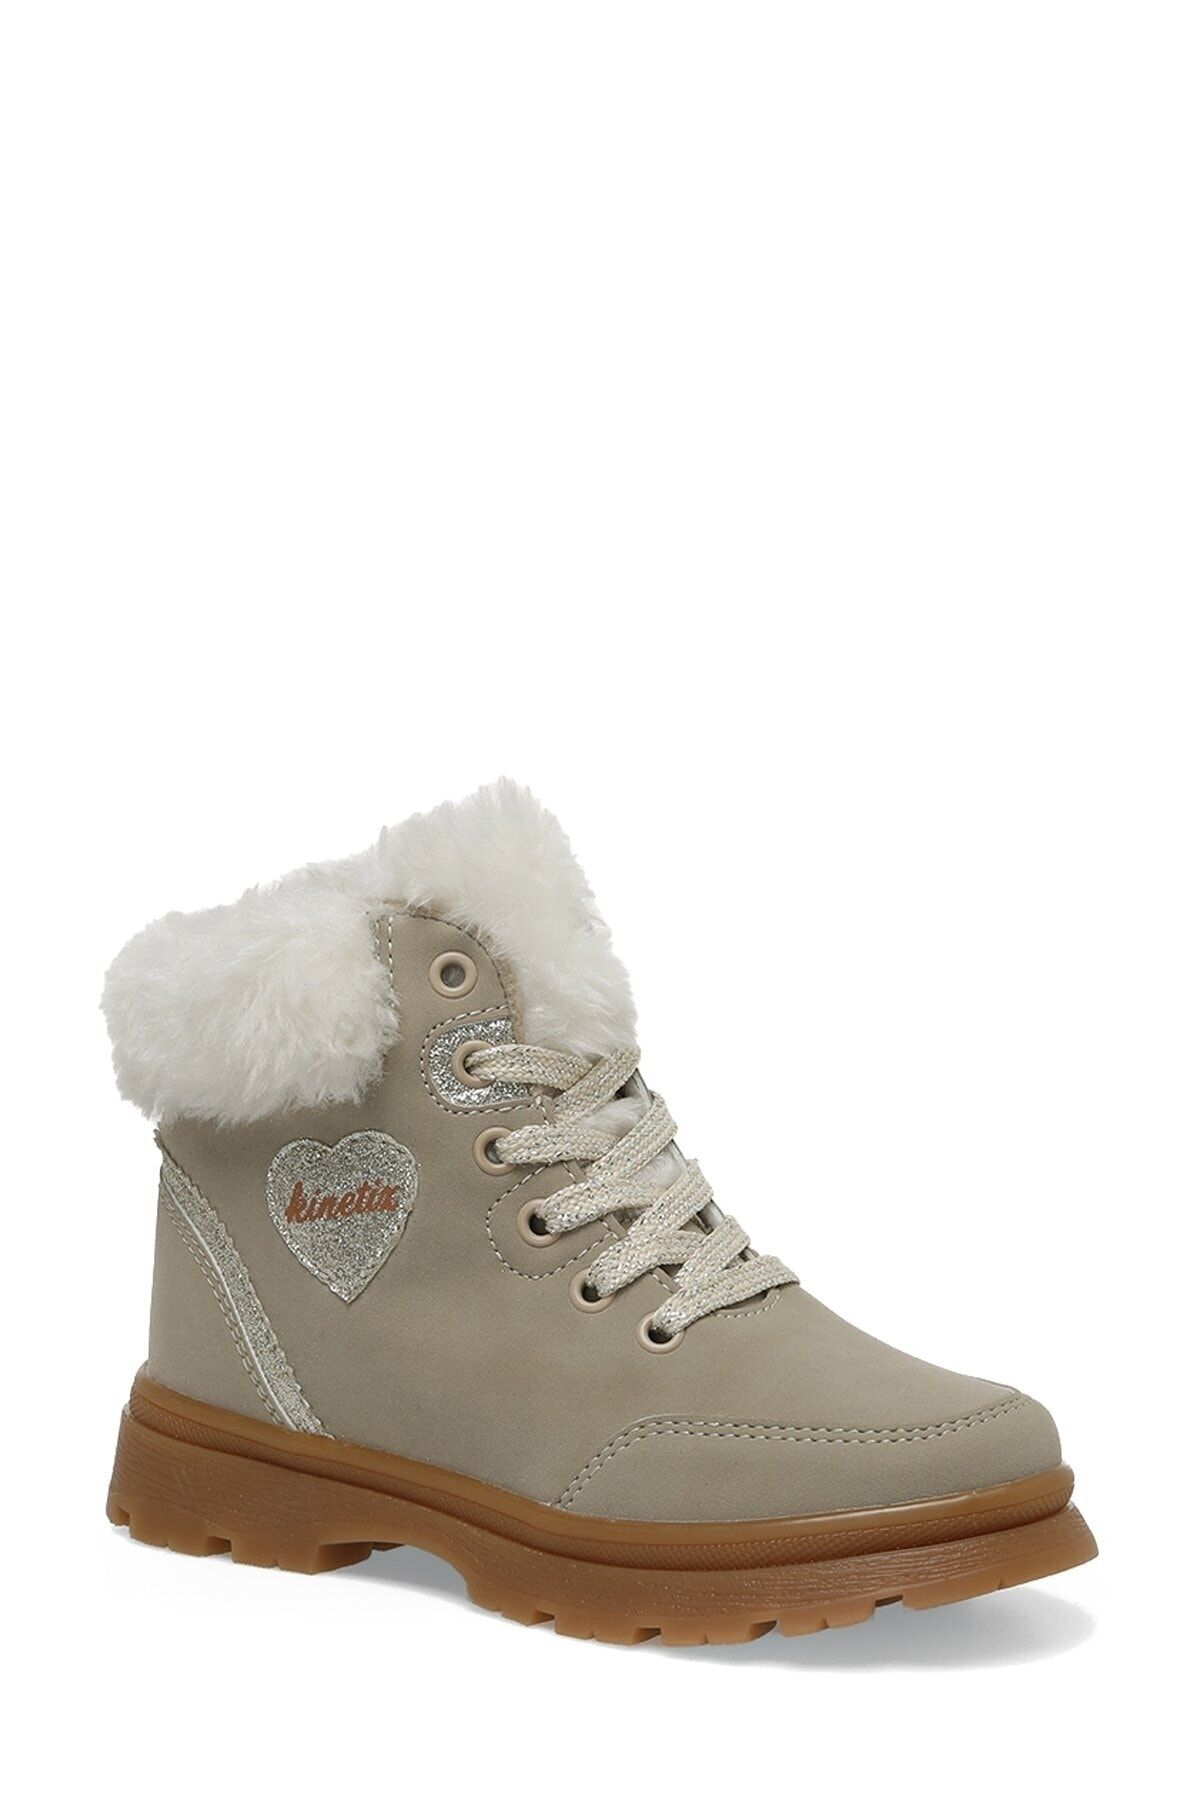 BUCKLY in GREY Sneaker Boots - OTBT shoes